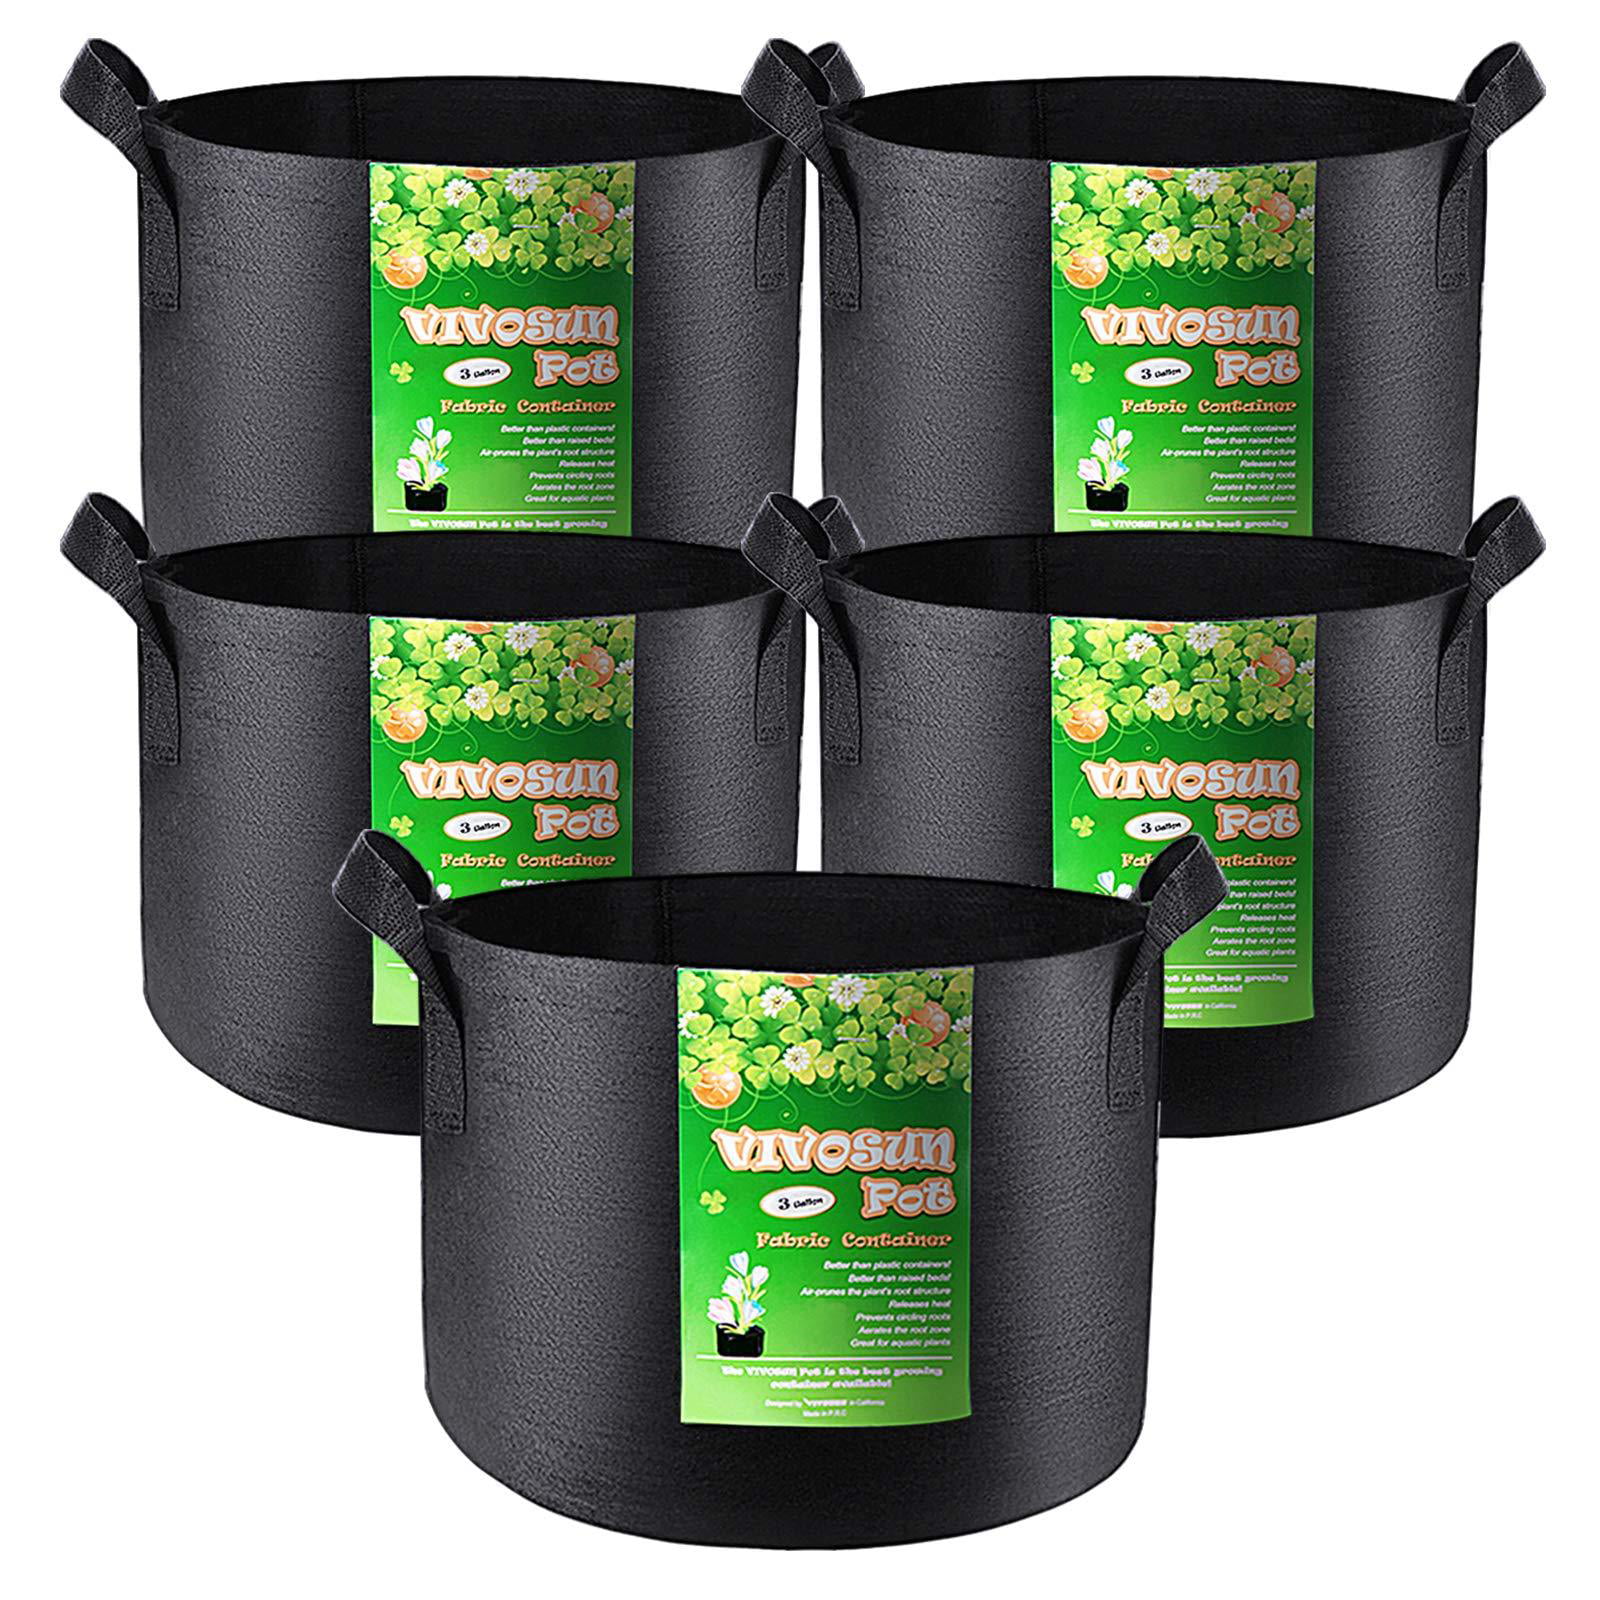 7 Gallon 5 Pack 1/3/5/7/10 Gallon Grow Bags,Heavy Duty Thickened Nonwoven Aeration Fabric Pots Portable Grow Bags with Handles Indoor & Outdoor Grow Containers for Vegetable/Flower/Plant/Fruits